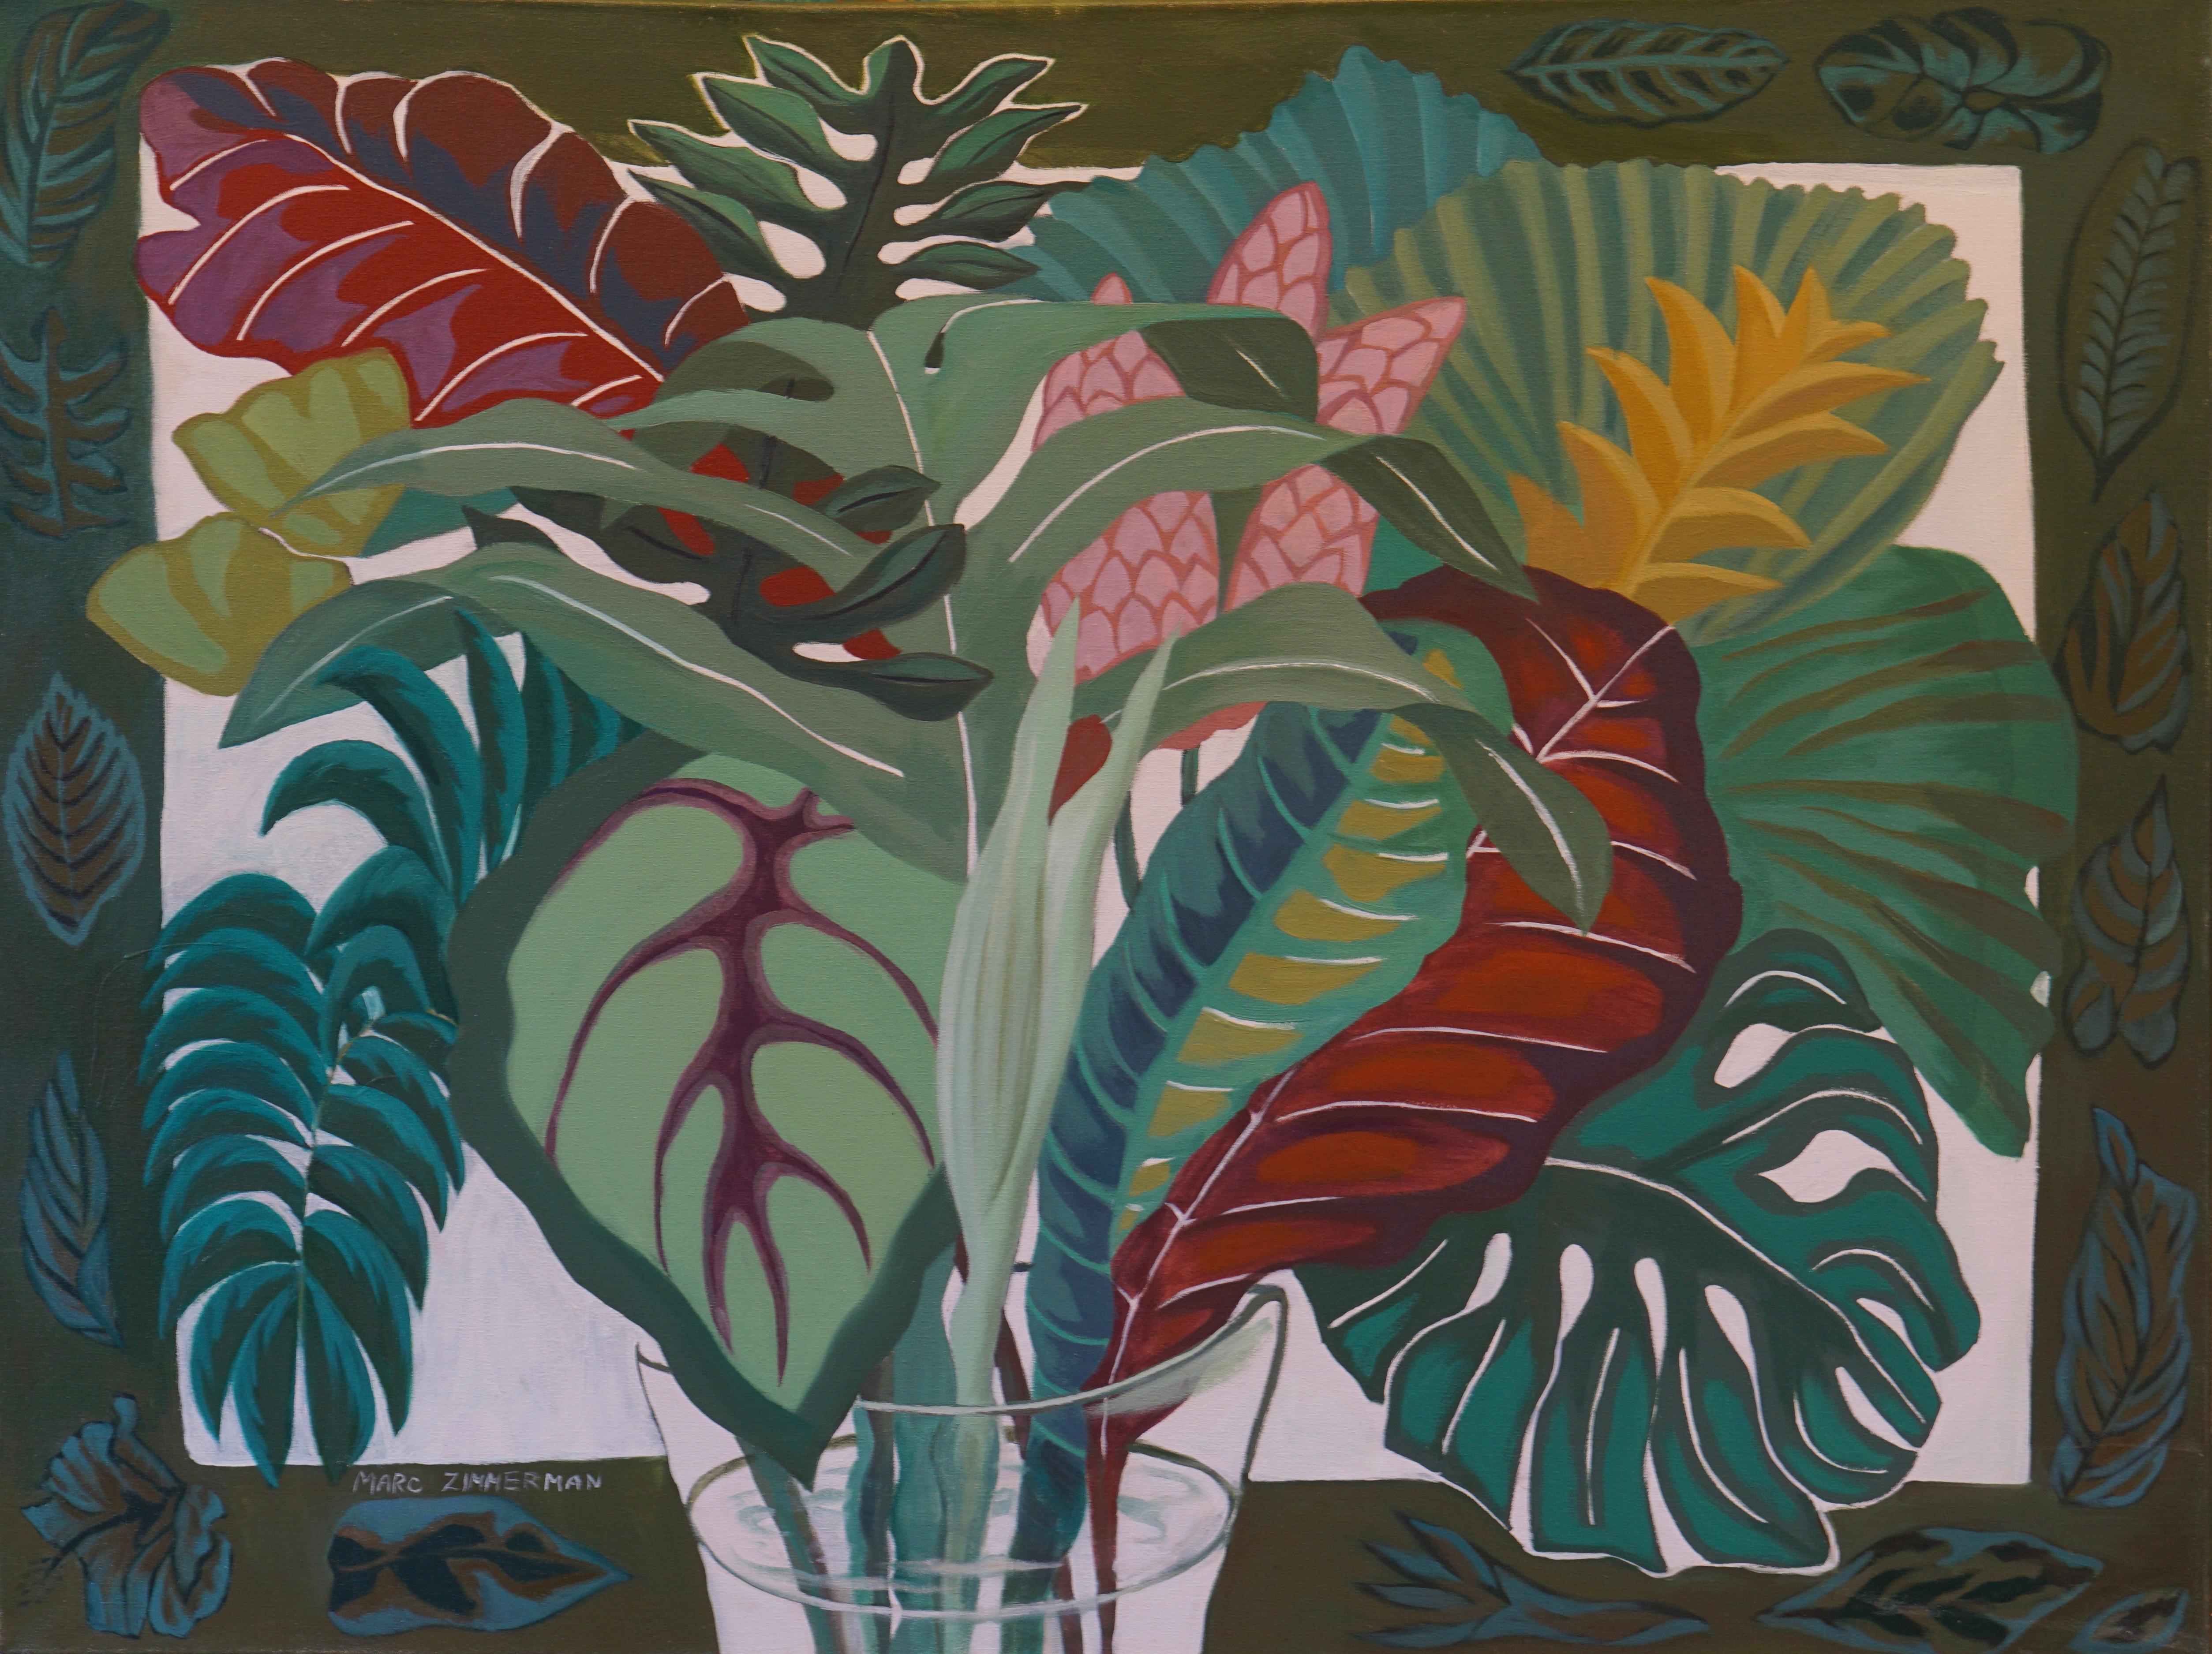 Tropical leaves are emphasized in all their glorious shapes and patterns in a colorful weaving, framed in by a Hawaiian motif.

Tropical Bouquet - Interior Painting - Oil On Canvas By Marc Zimmerman

This masterpiece is exhibited in the Zimmerman